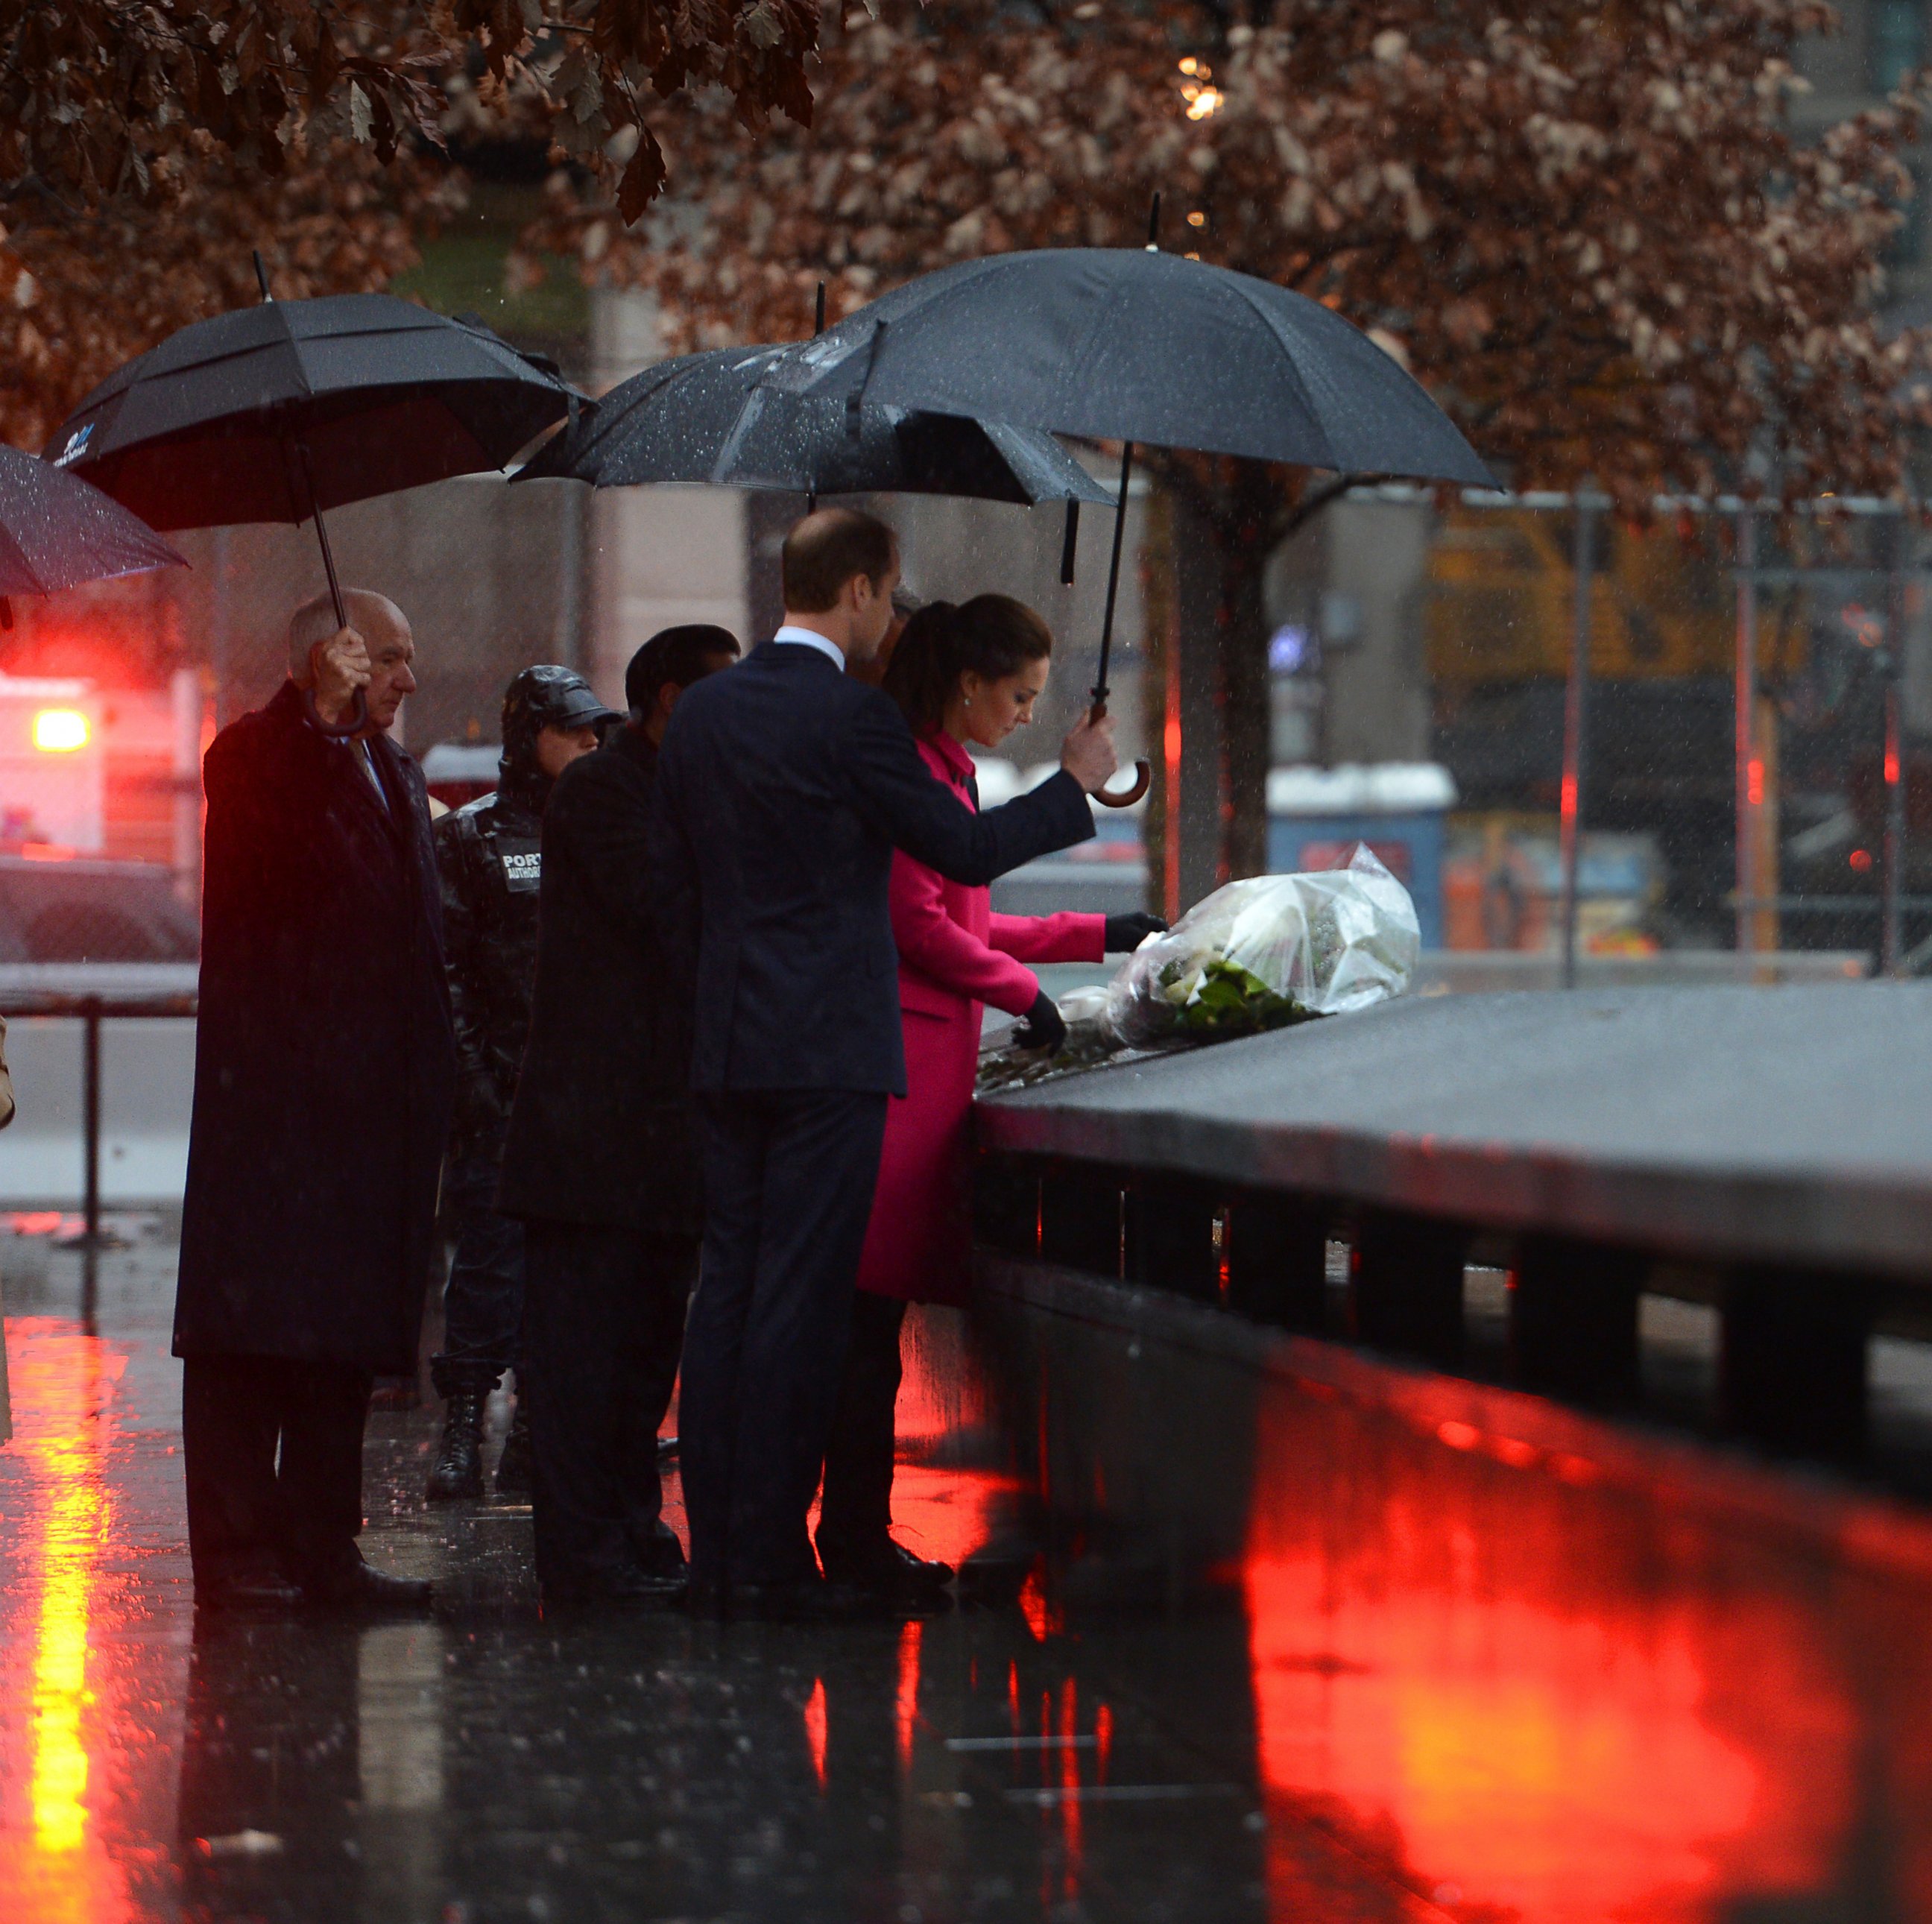 PHOTO: Prince William, Duke of Cambridge and Catherine, Duchess of Cambridge lay flowers in memory of the victims of the September 11 terrorist attacks during a visit to the National September 11 Memorial & Museum on Dec. 9, 2014 in New York City.  